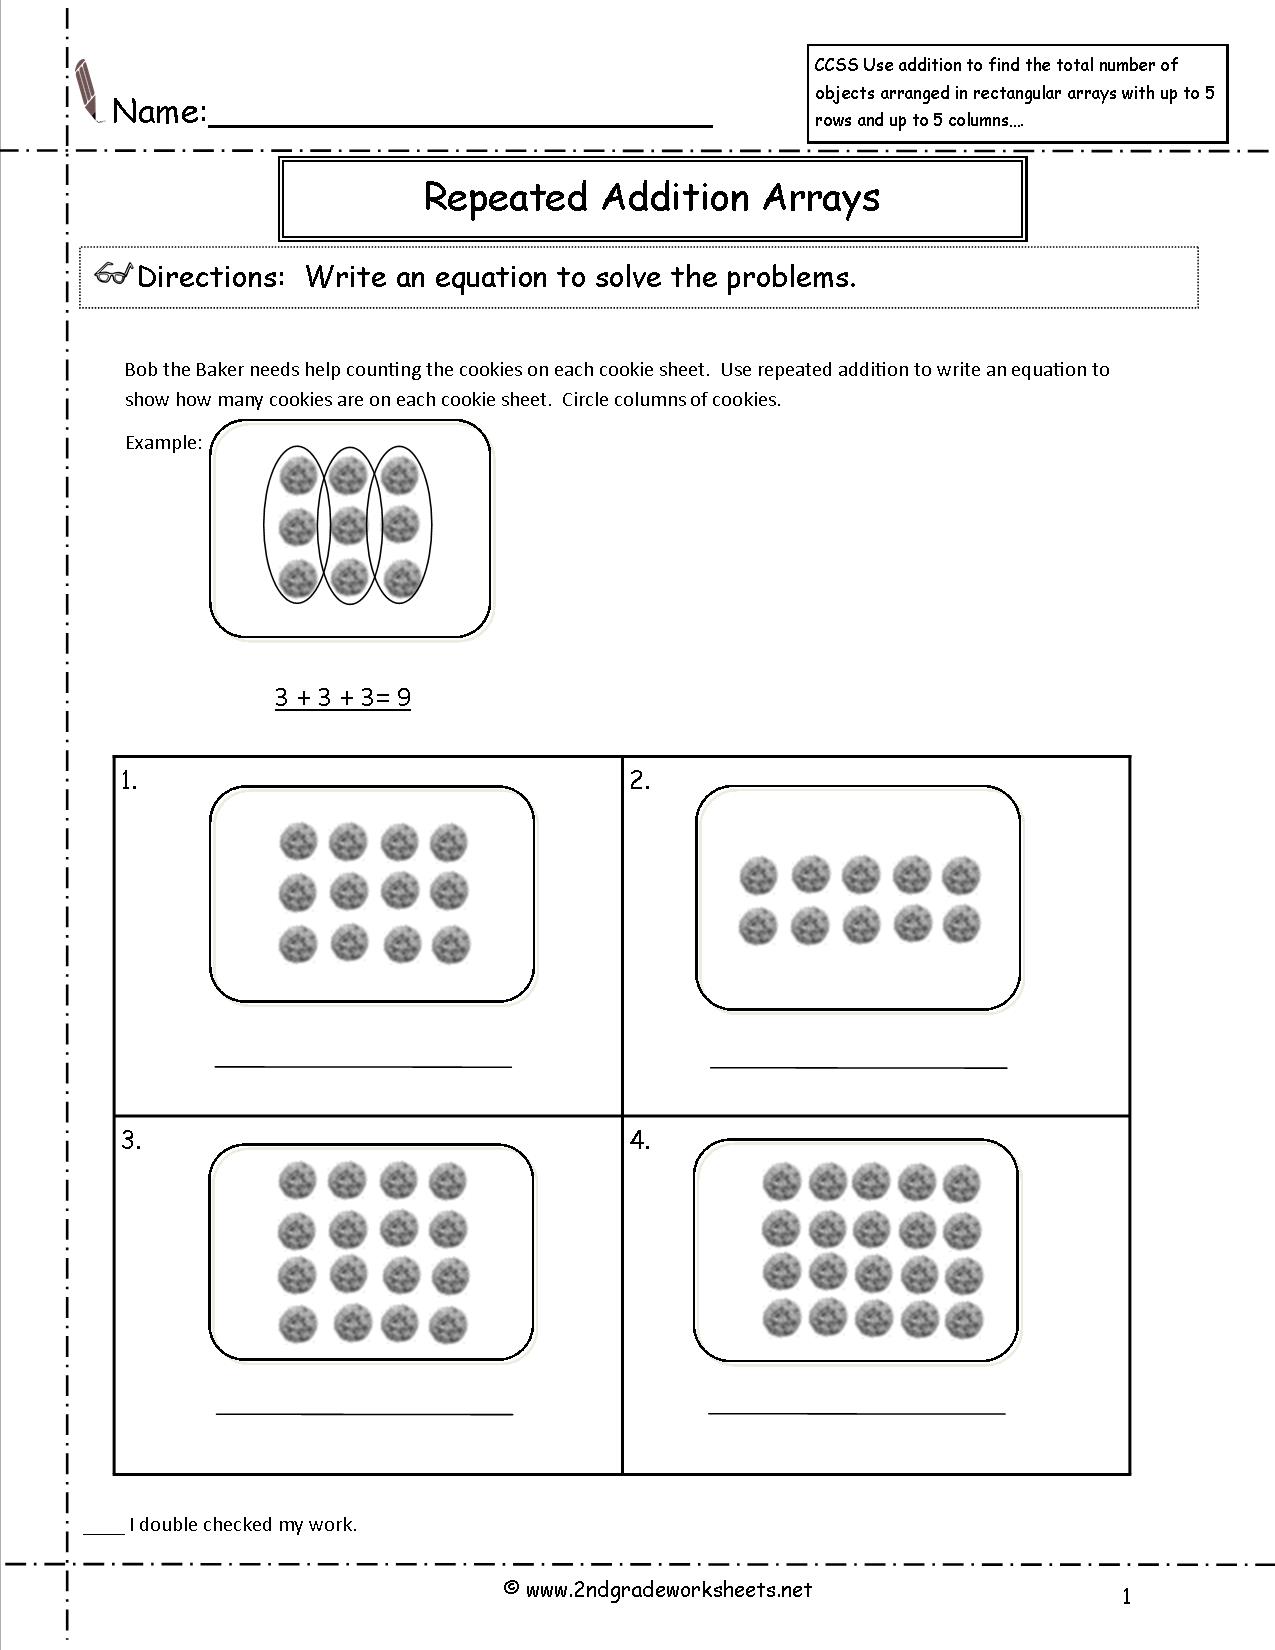 Repeated Addition Arrays Printable Worksheets